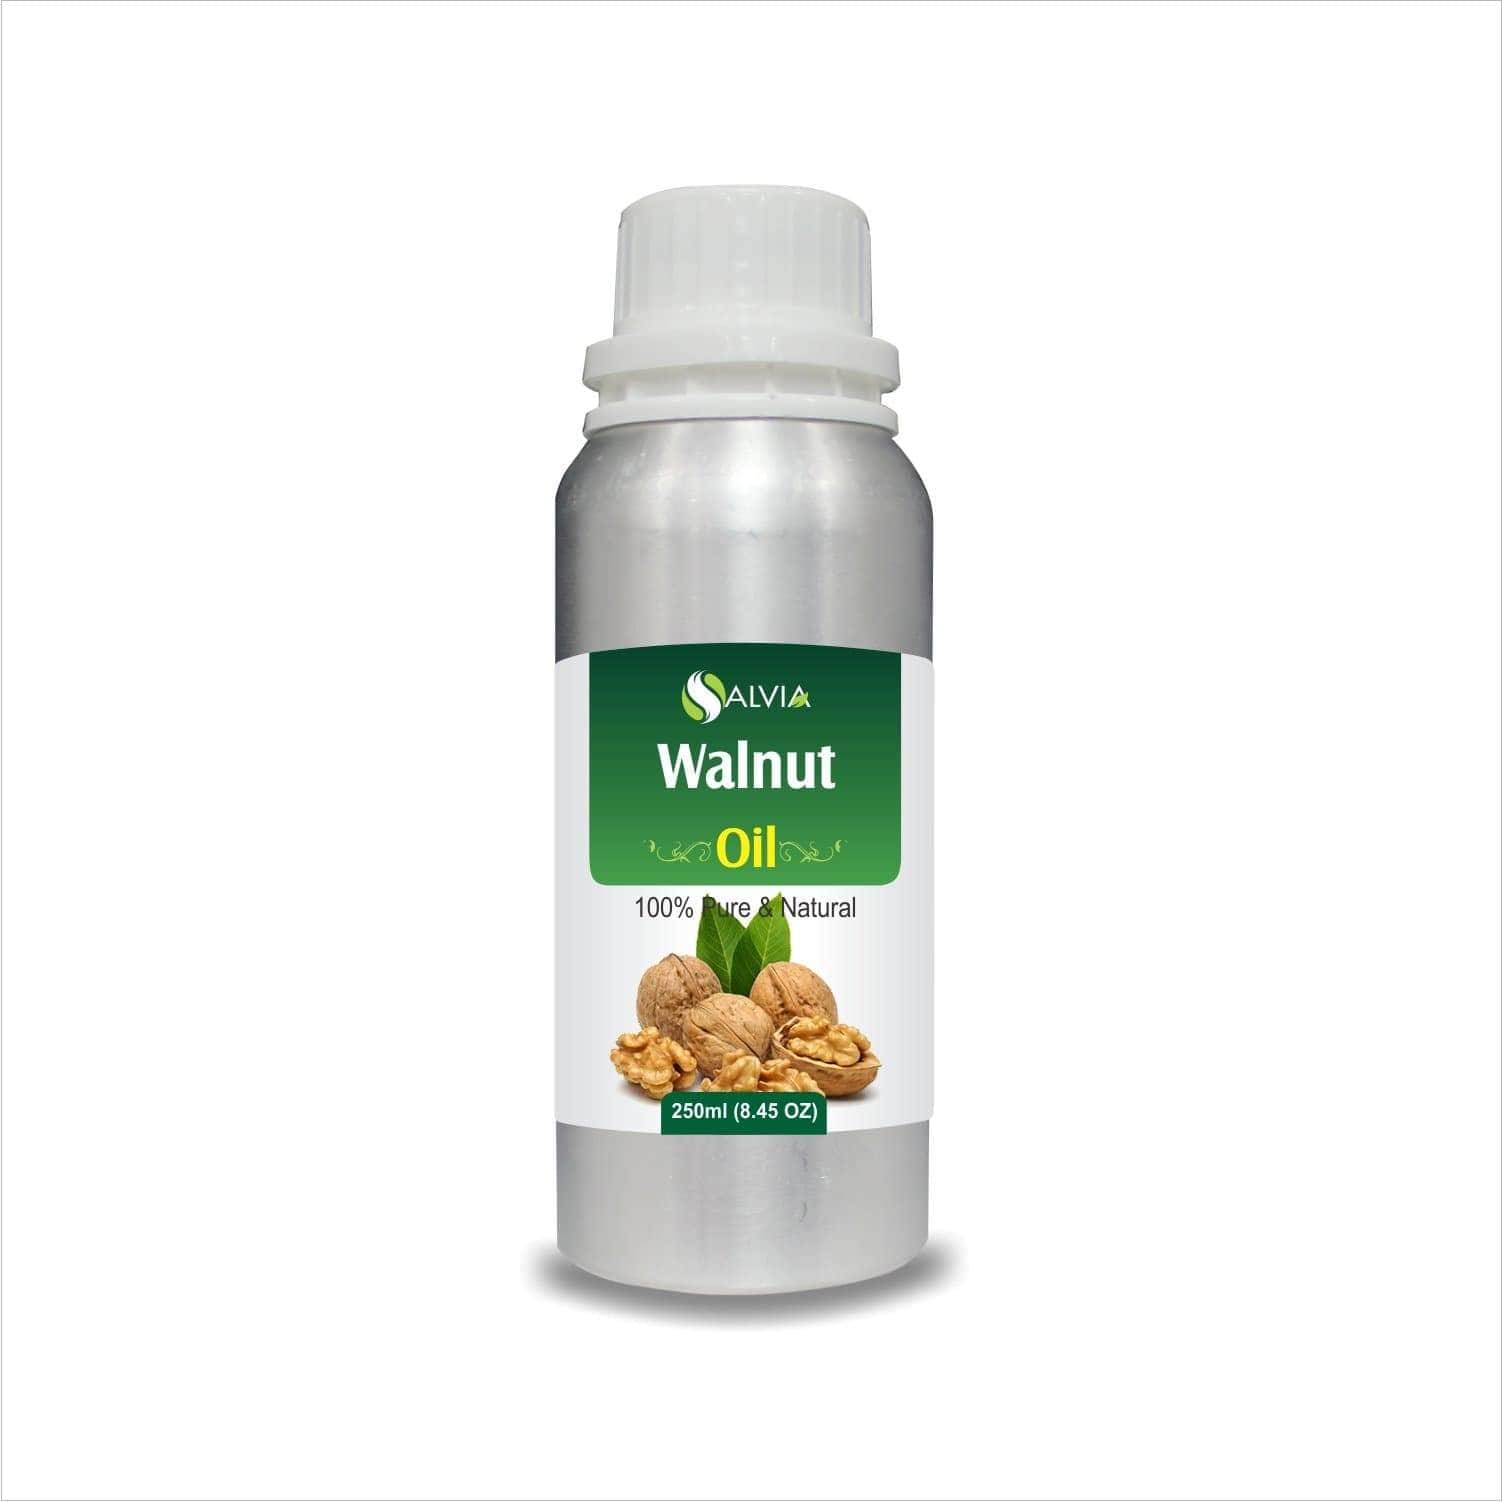 Salvia Natural Carrier Oils 250ml Walnut Oil (Juglans-Regia) 100% Natural Pure Carrier Oil Strengthens Hair Root, Promotes hair Growth, Anti-Aging Properties, Moisturizes, Reduces Scars, Solves  Psoriasis & More